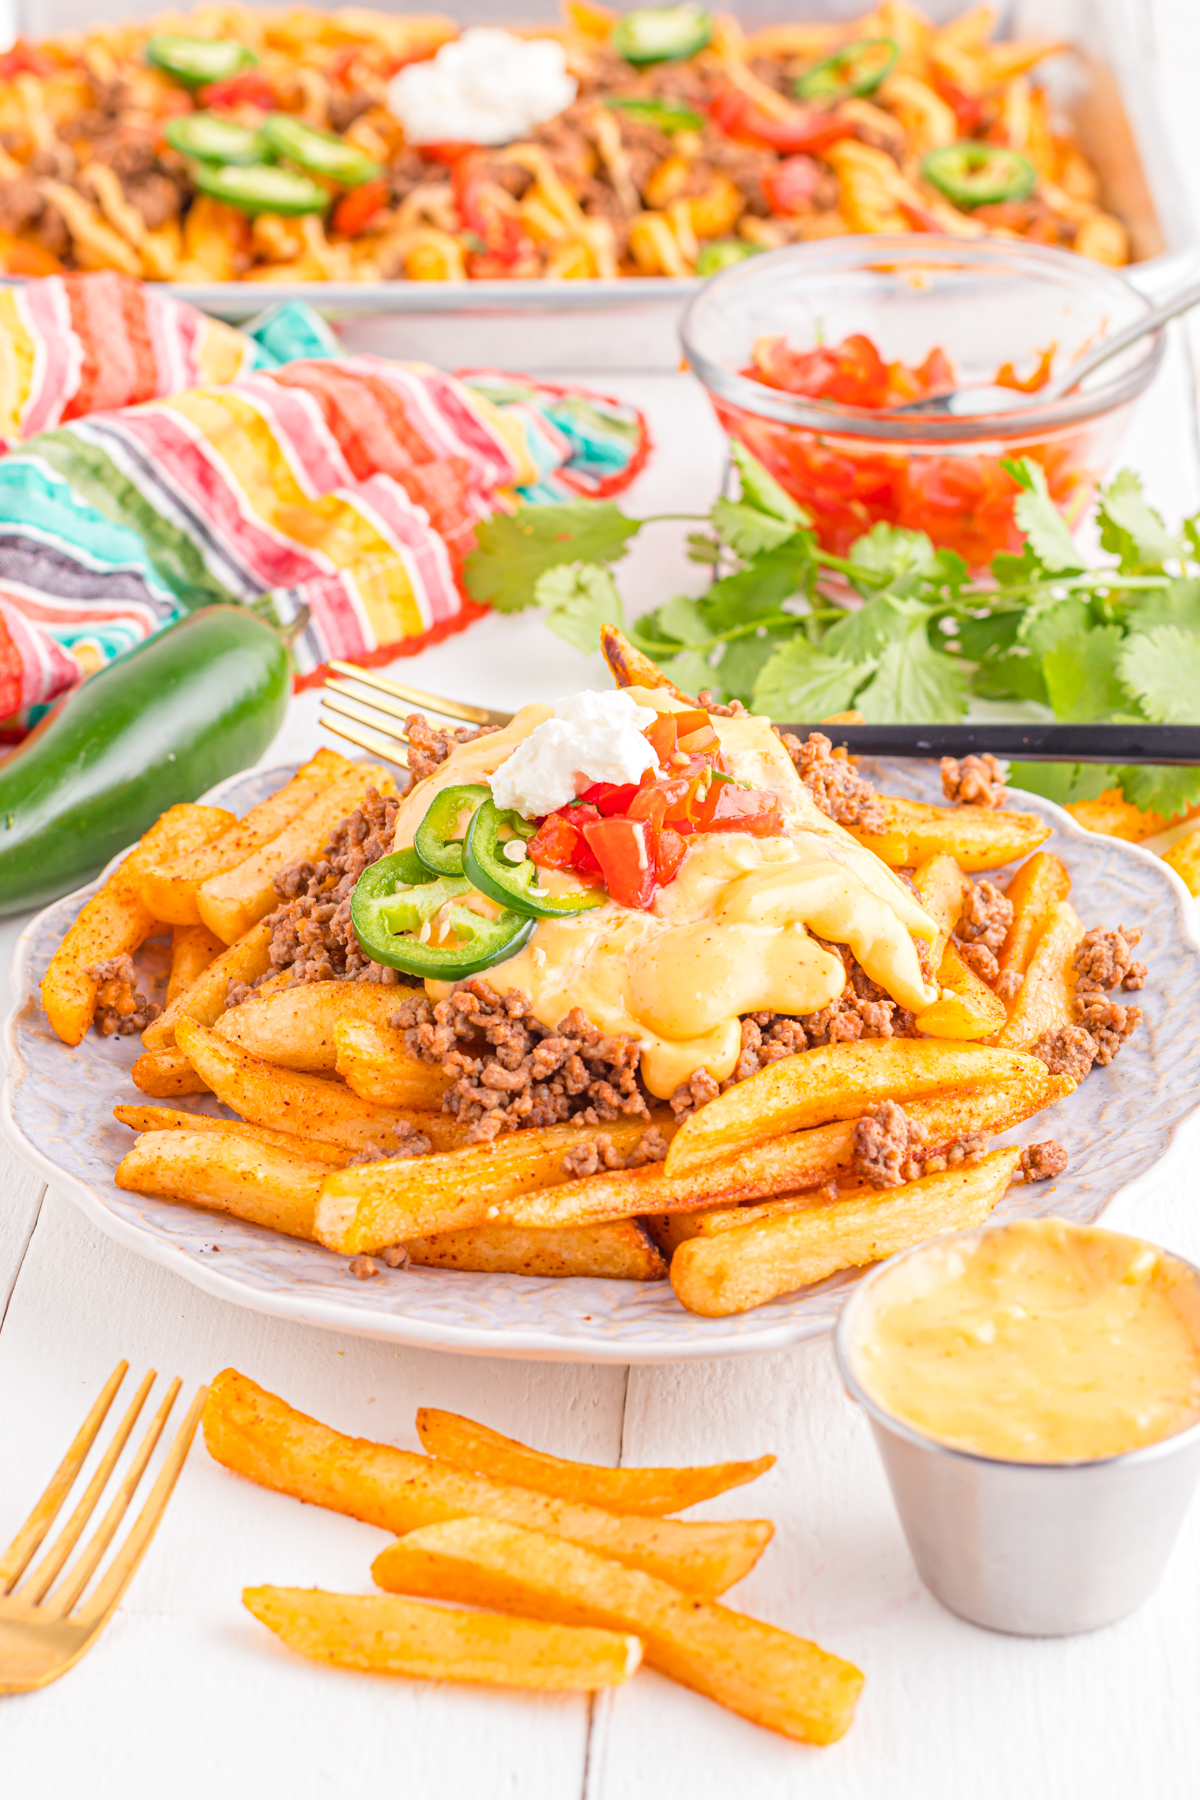 Loaded taco bell nacho fries recipe  on a plate.